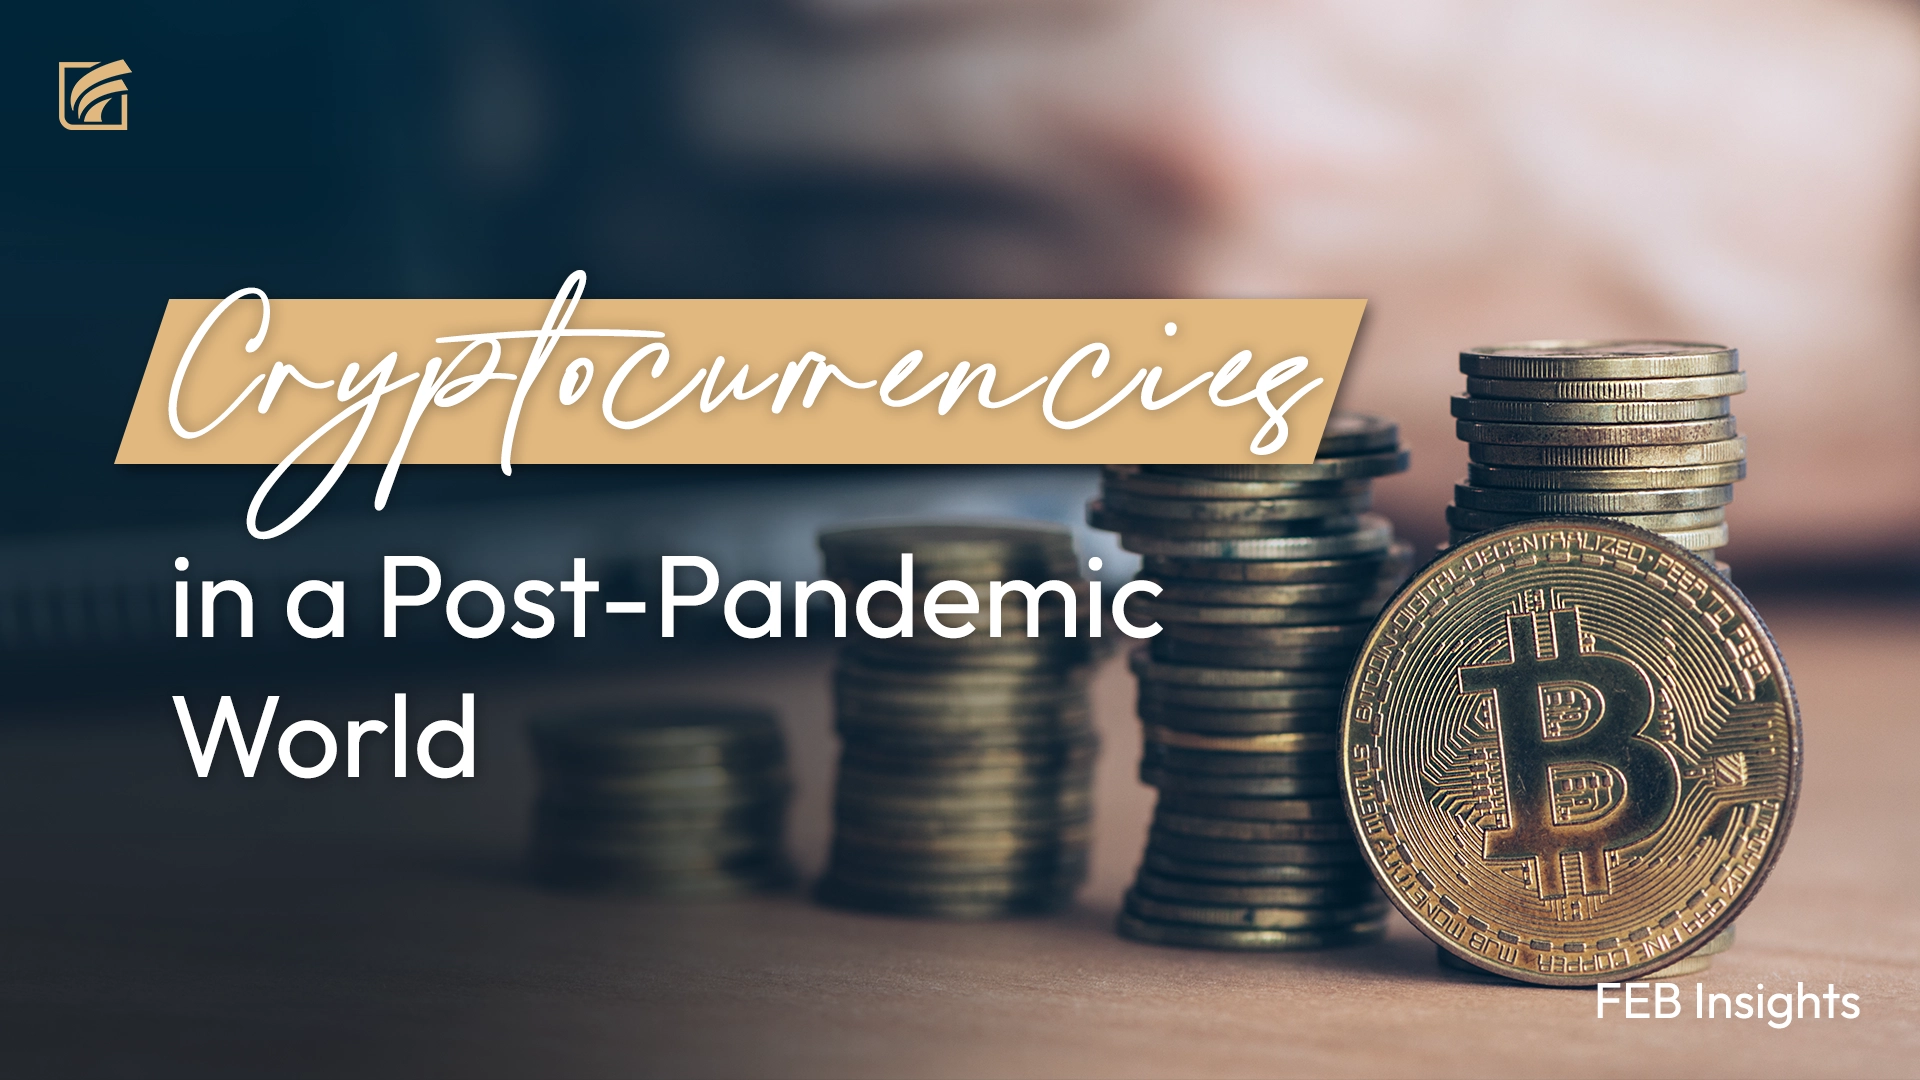 Cryptocurrencies in a Post-Pandemic World